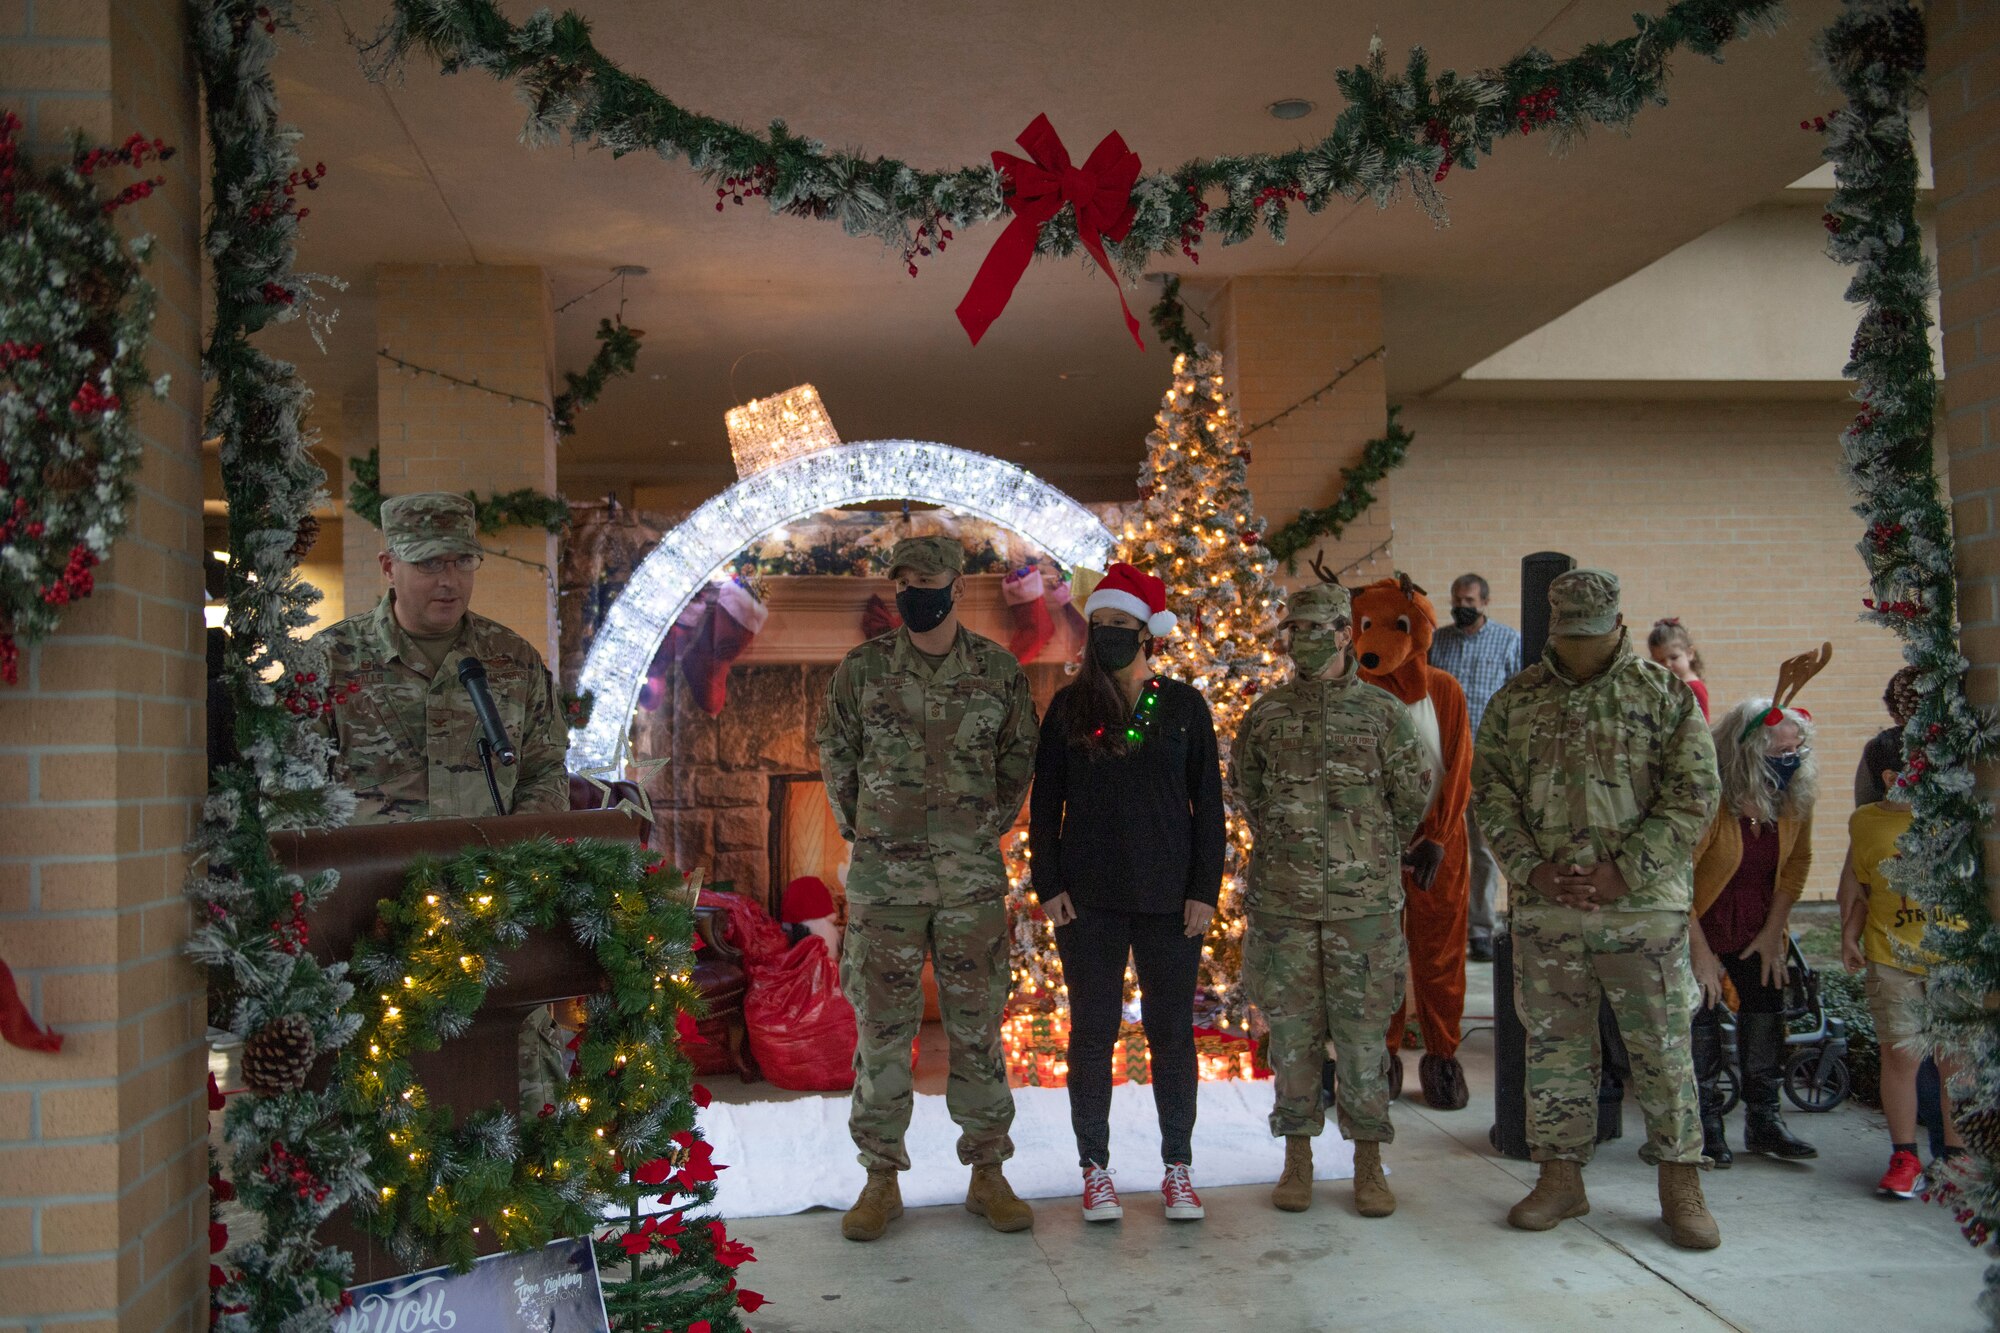 A photo of Airman standing in front of holiday decorations, while Col. Dan Walls speaks at a virtual tree-lighting ceremony.